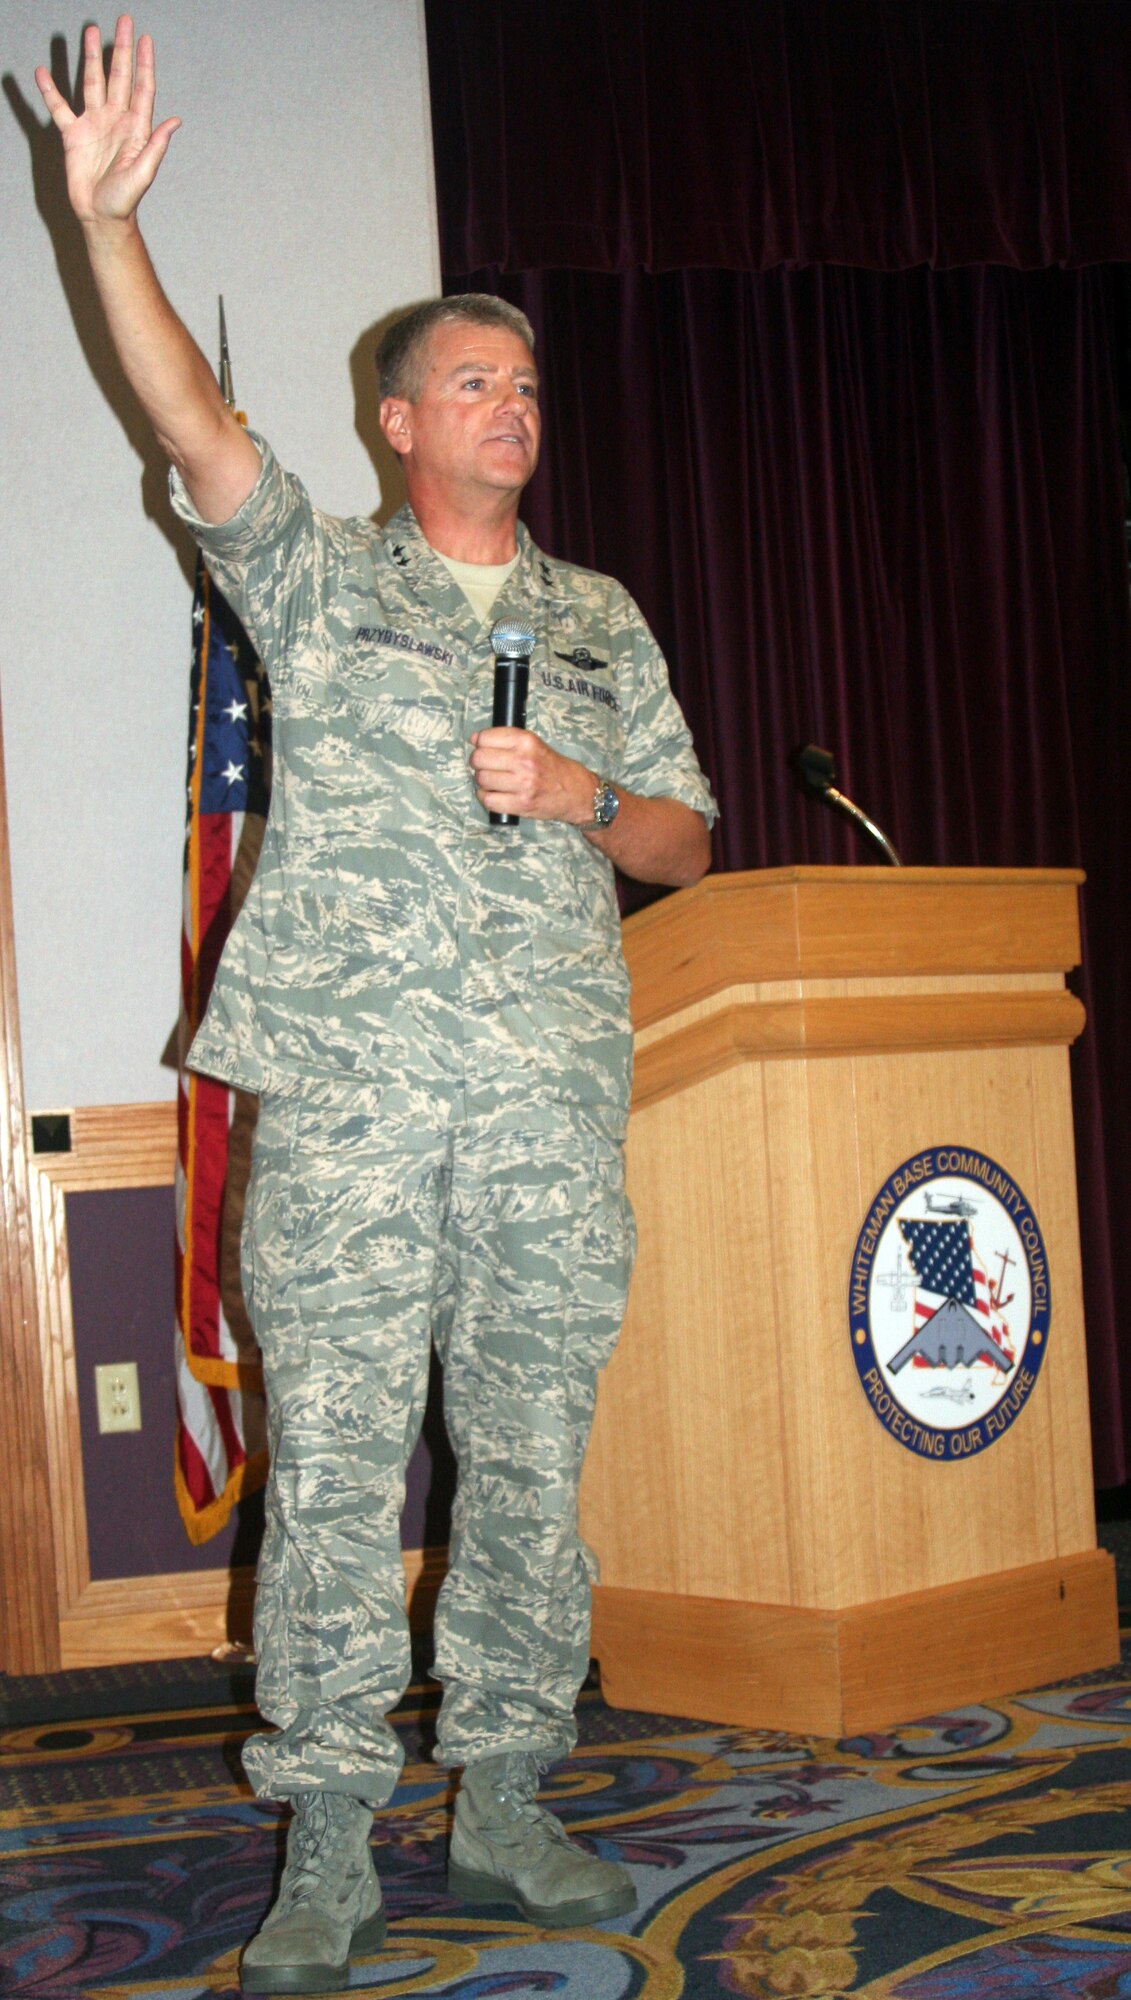 Maj. Gen. Anthony Przybyslawski, Air Force Personnel Center Commander, speaks to members of the base community council at a luncheon Aug. 2 about the future of the Air Force. (U.S. Air Force Photo/Airman 1st Class Stephen Linch) 